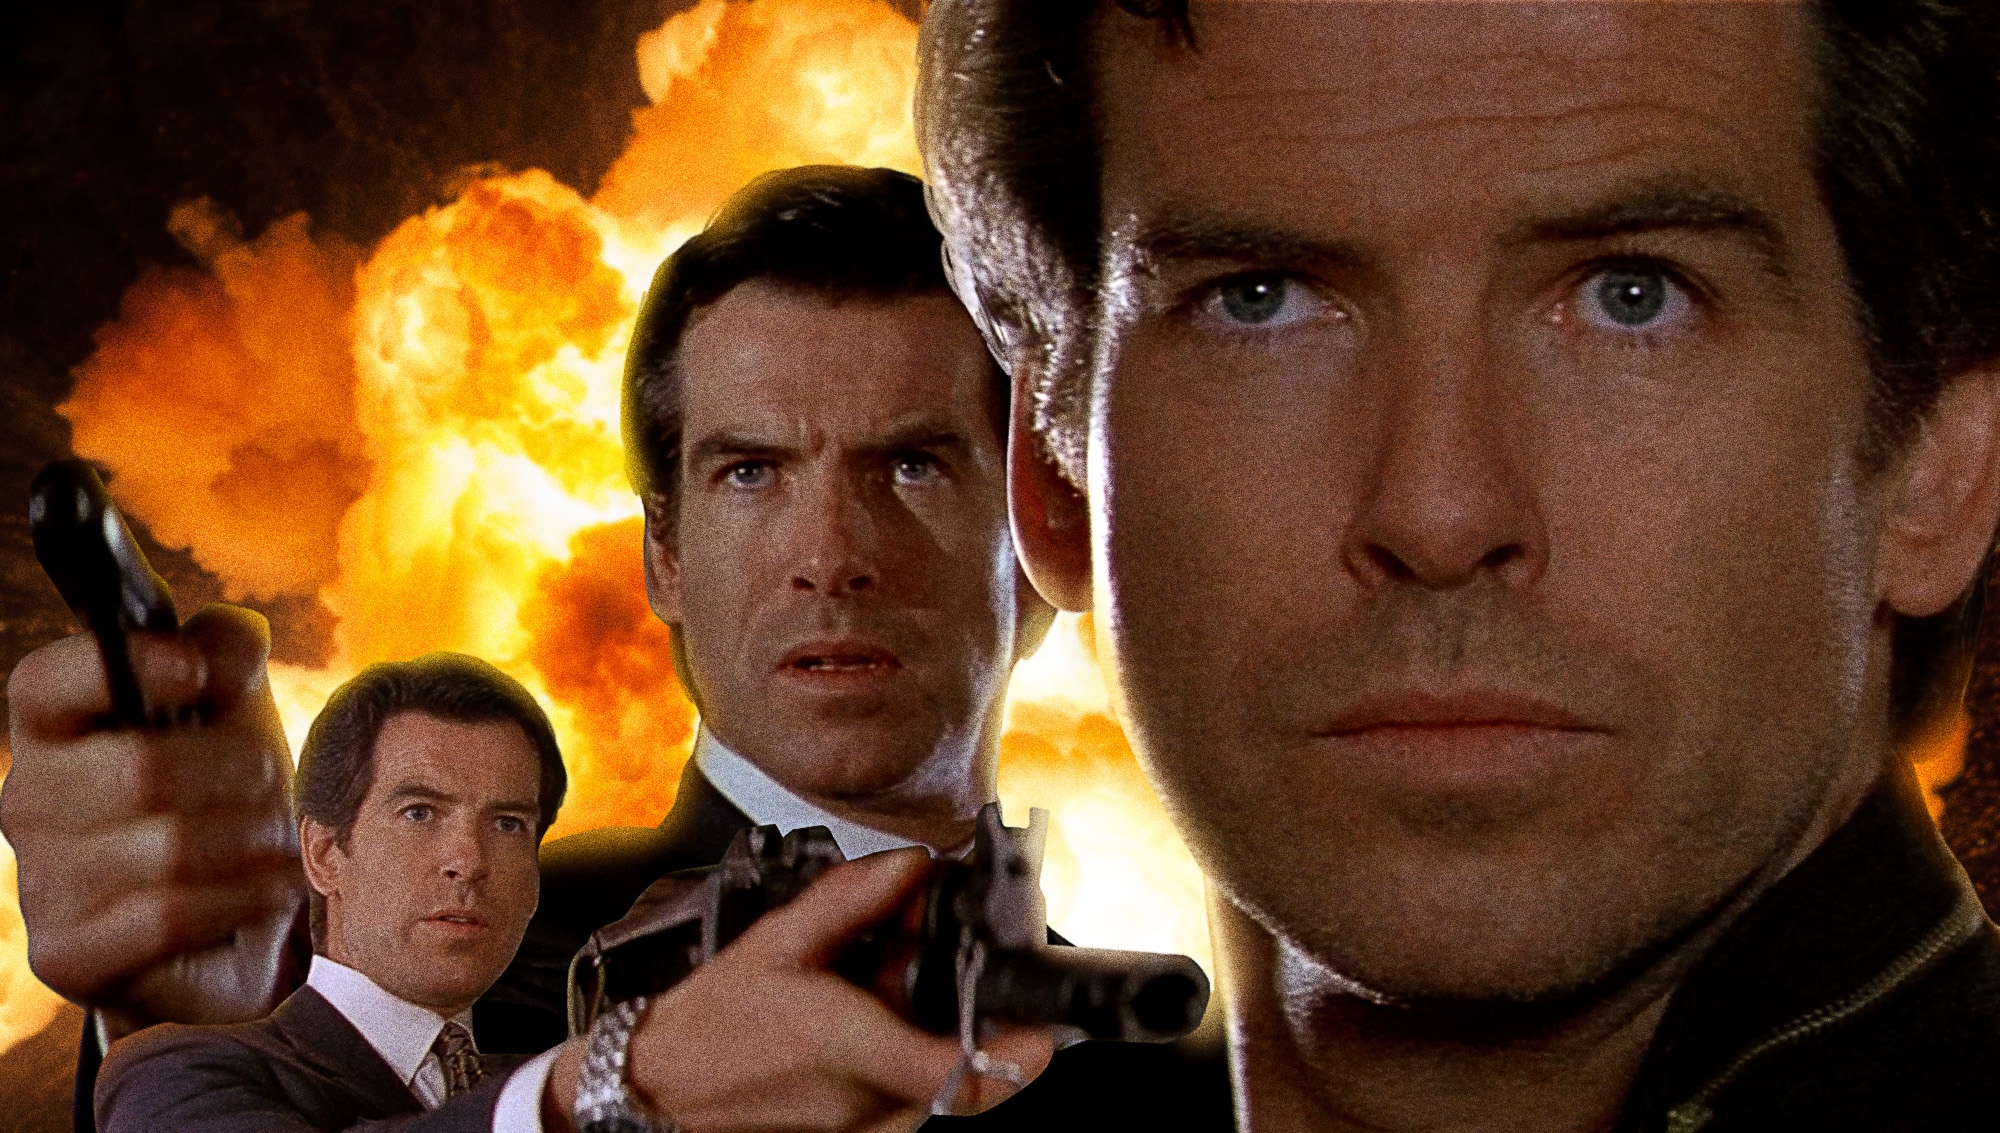 How Pierce Brosnan pushed James Bond forward—and paved the way for Daniel Craig